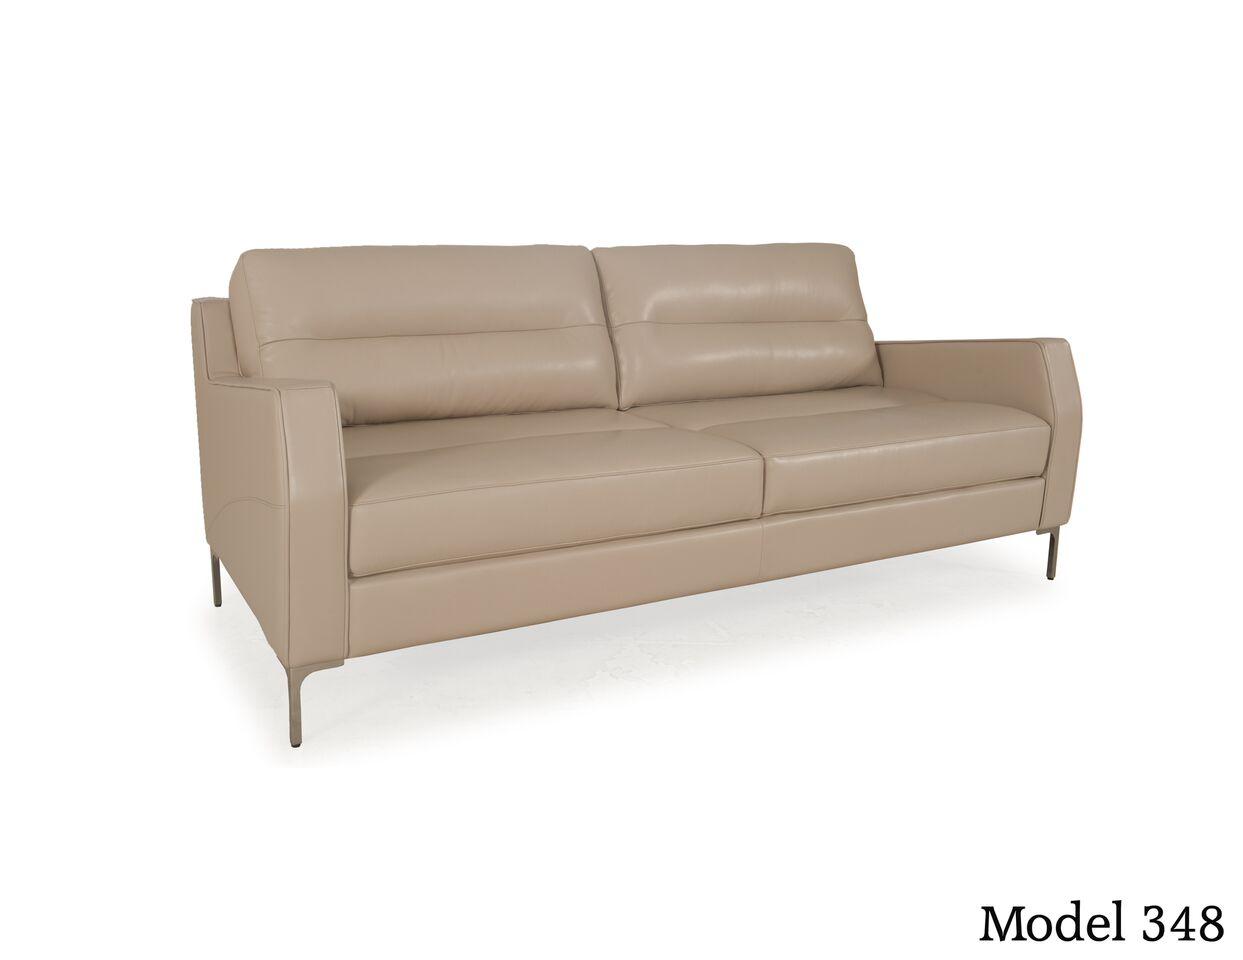 

    
Moroni Isabel 348 Top Grain Leather Upholstery Midcentury Loveseat SPECIAL ORDER
